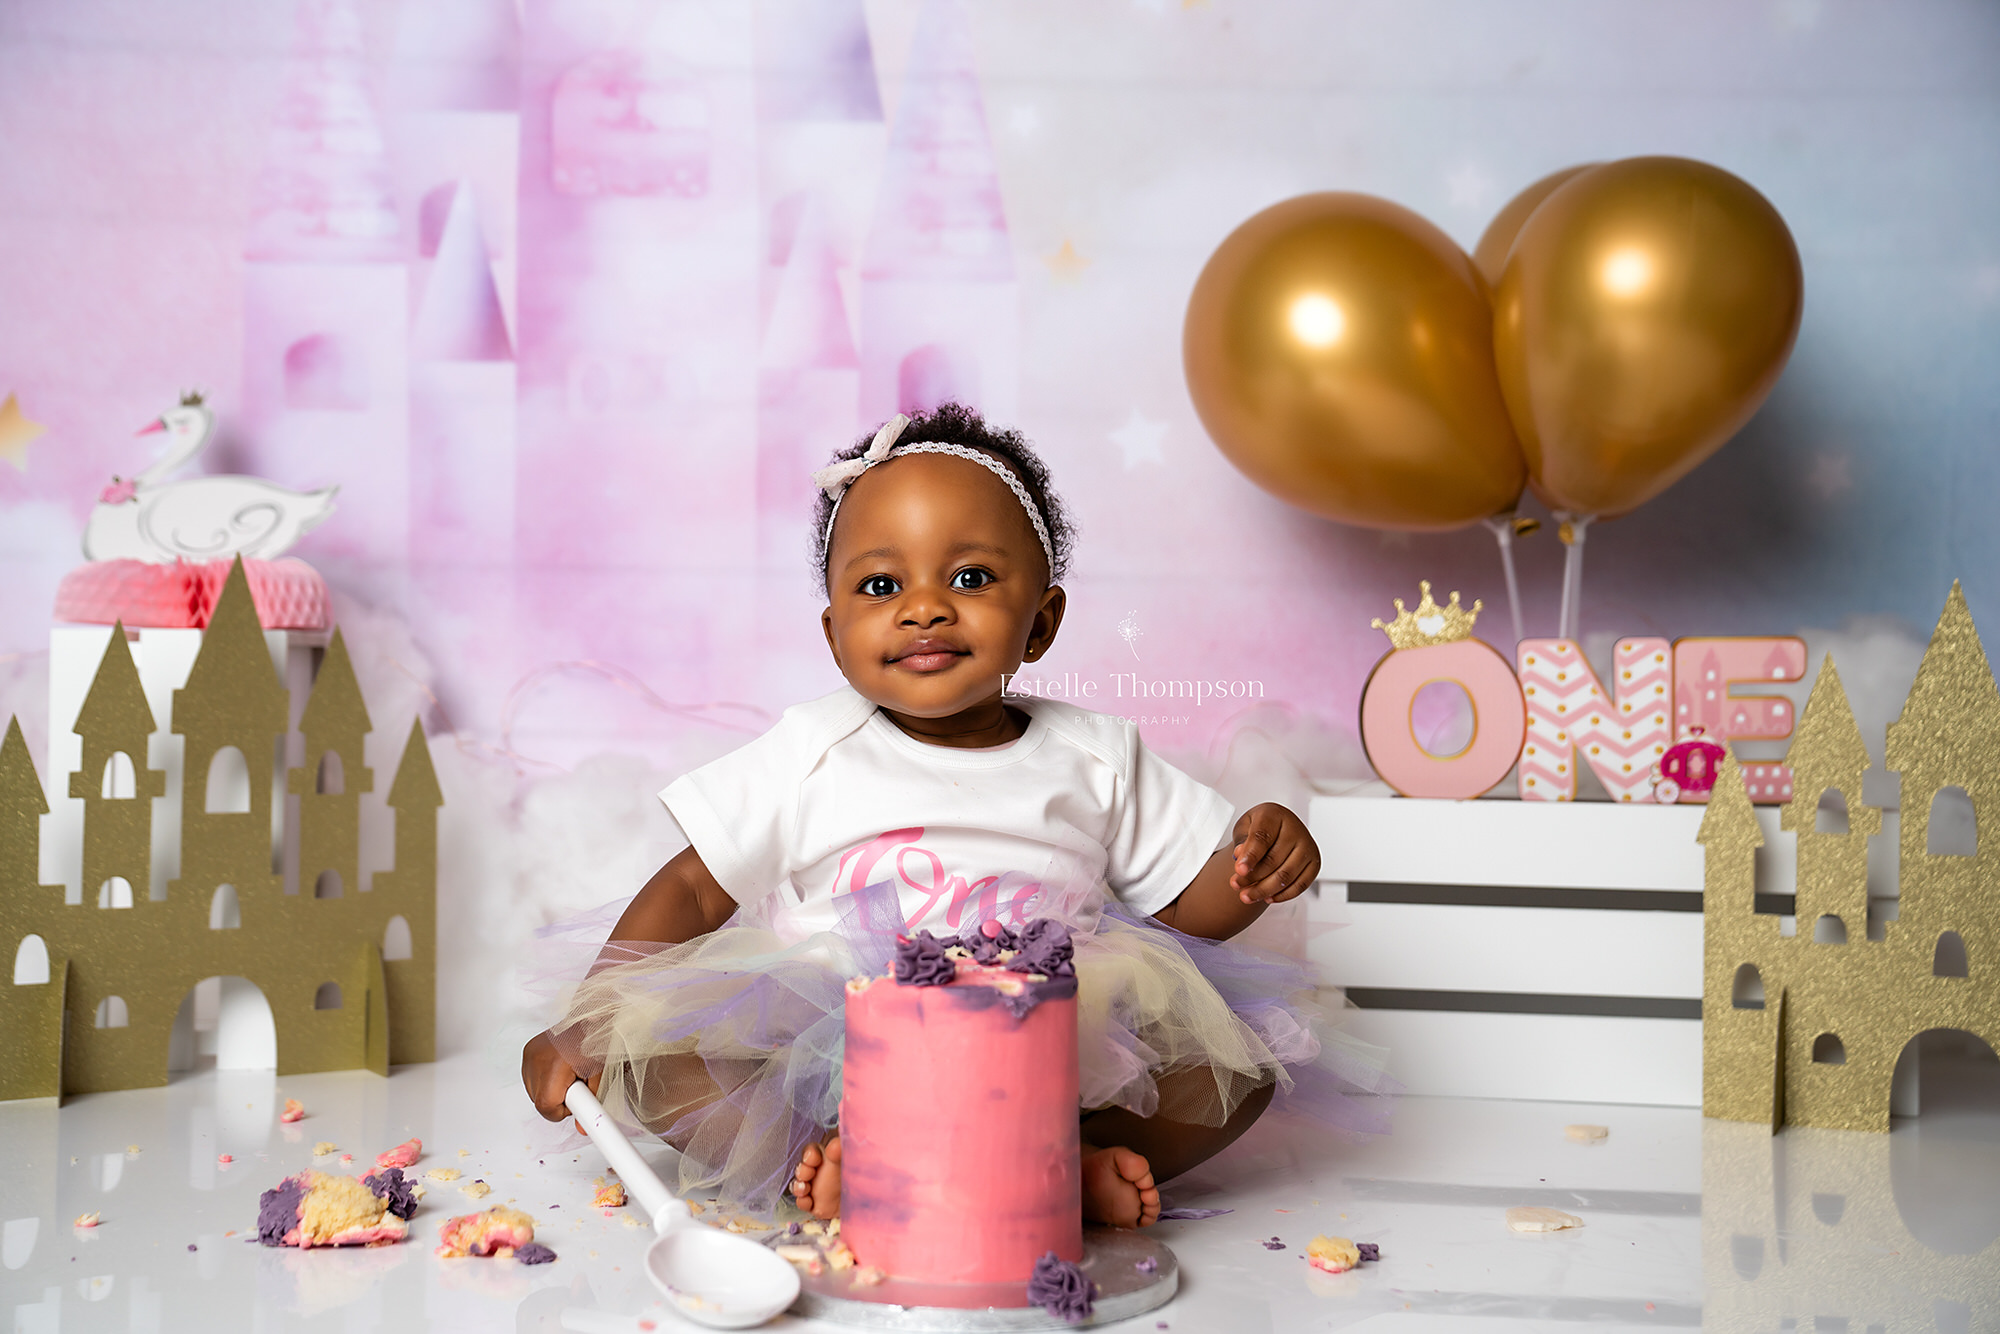 Baby girl with a birthday cake on her first birthday photoshoot